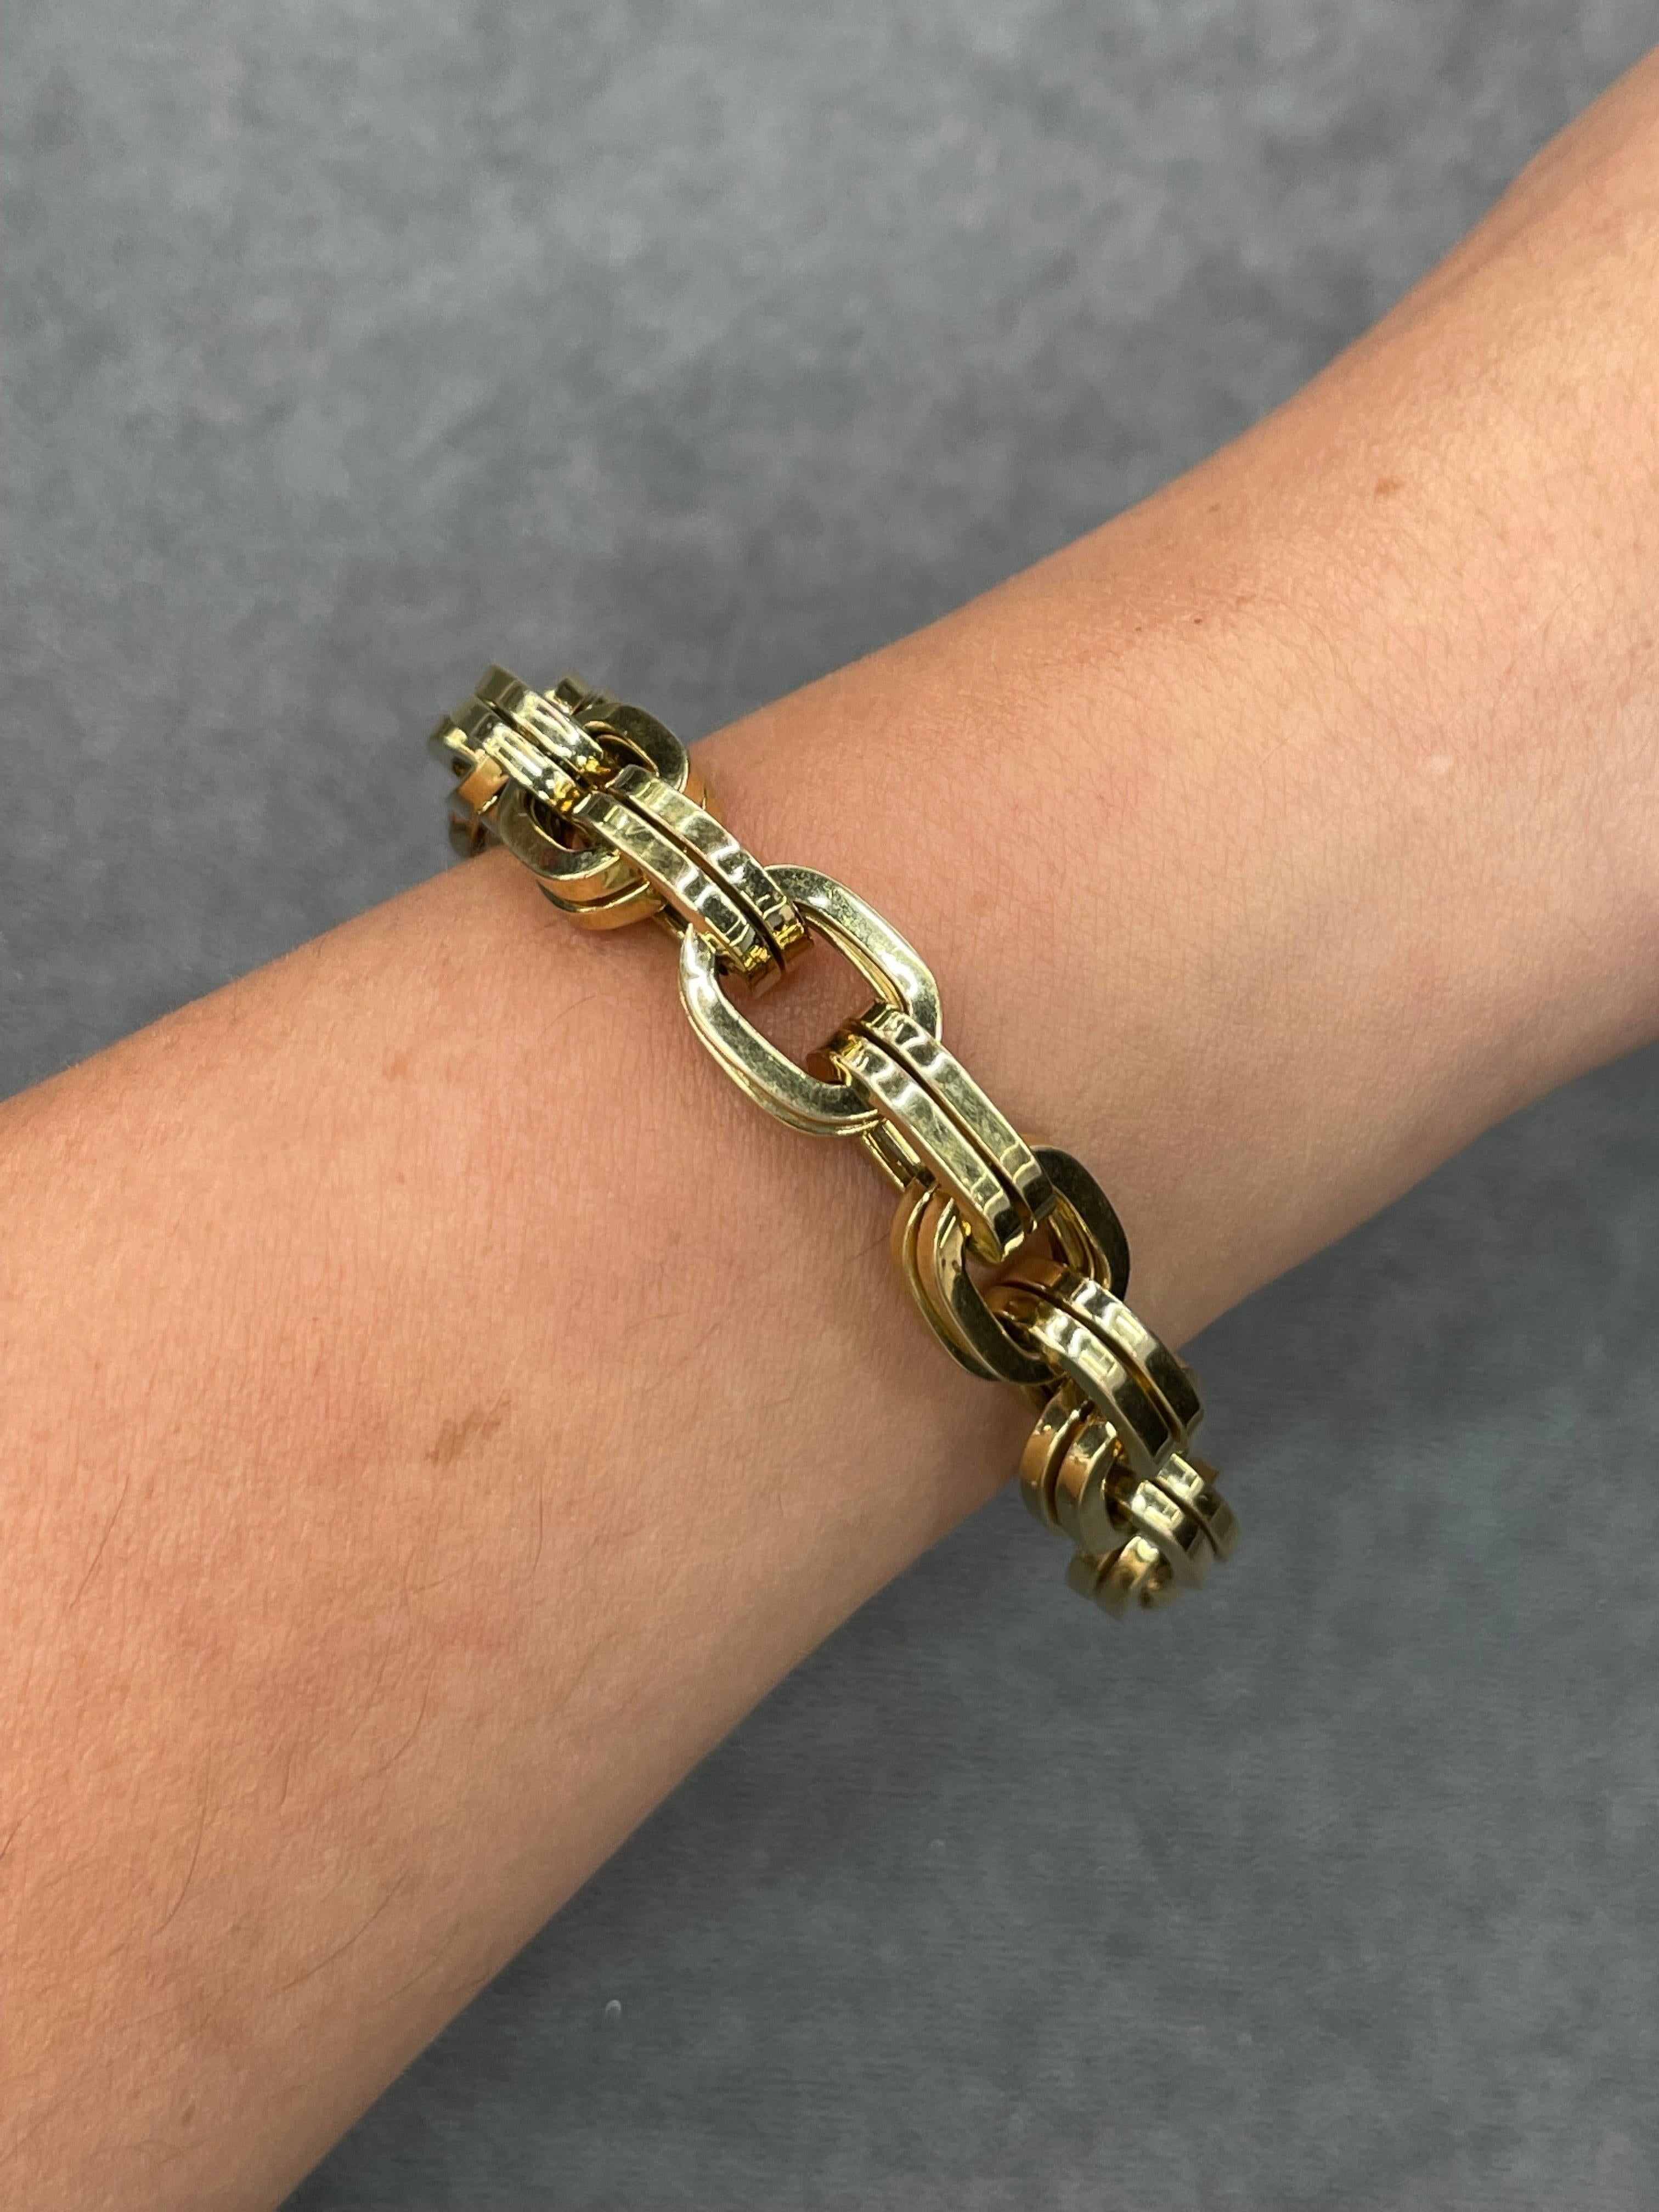 Italian Double Square Link Bracelet 22.8 Grams 14 Karat Yellow Gold In Excellent Condition For Sale In New York, NY